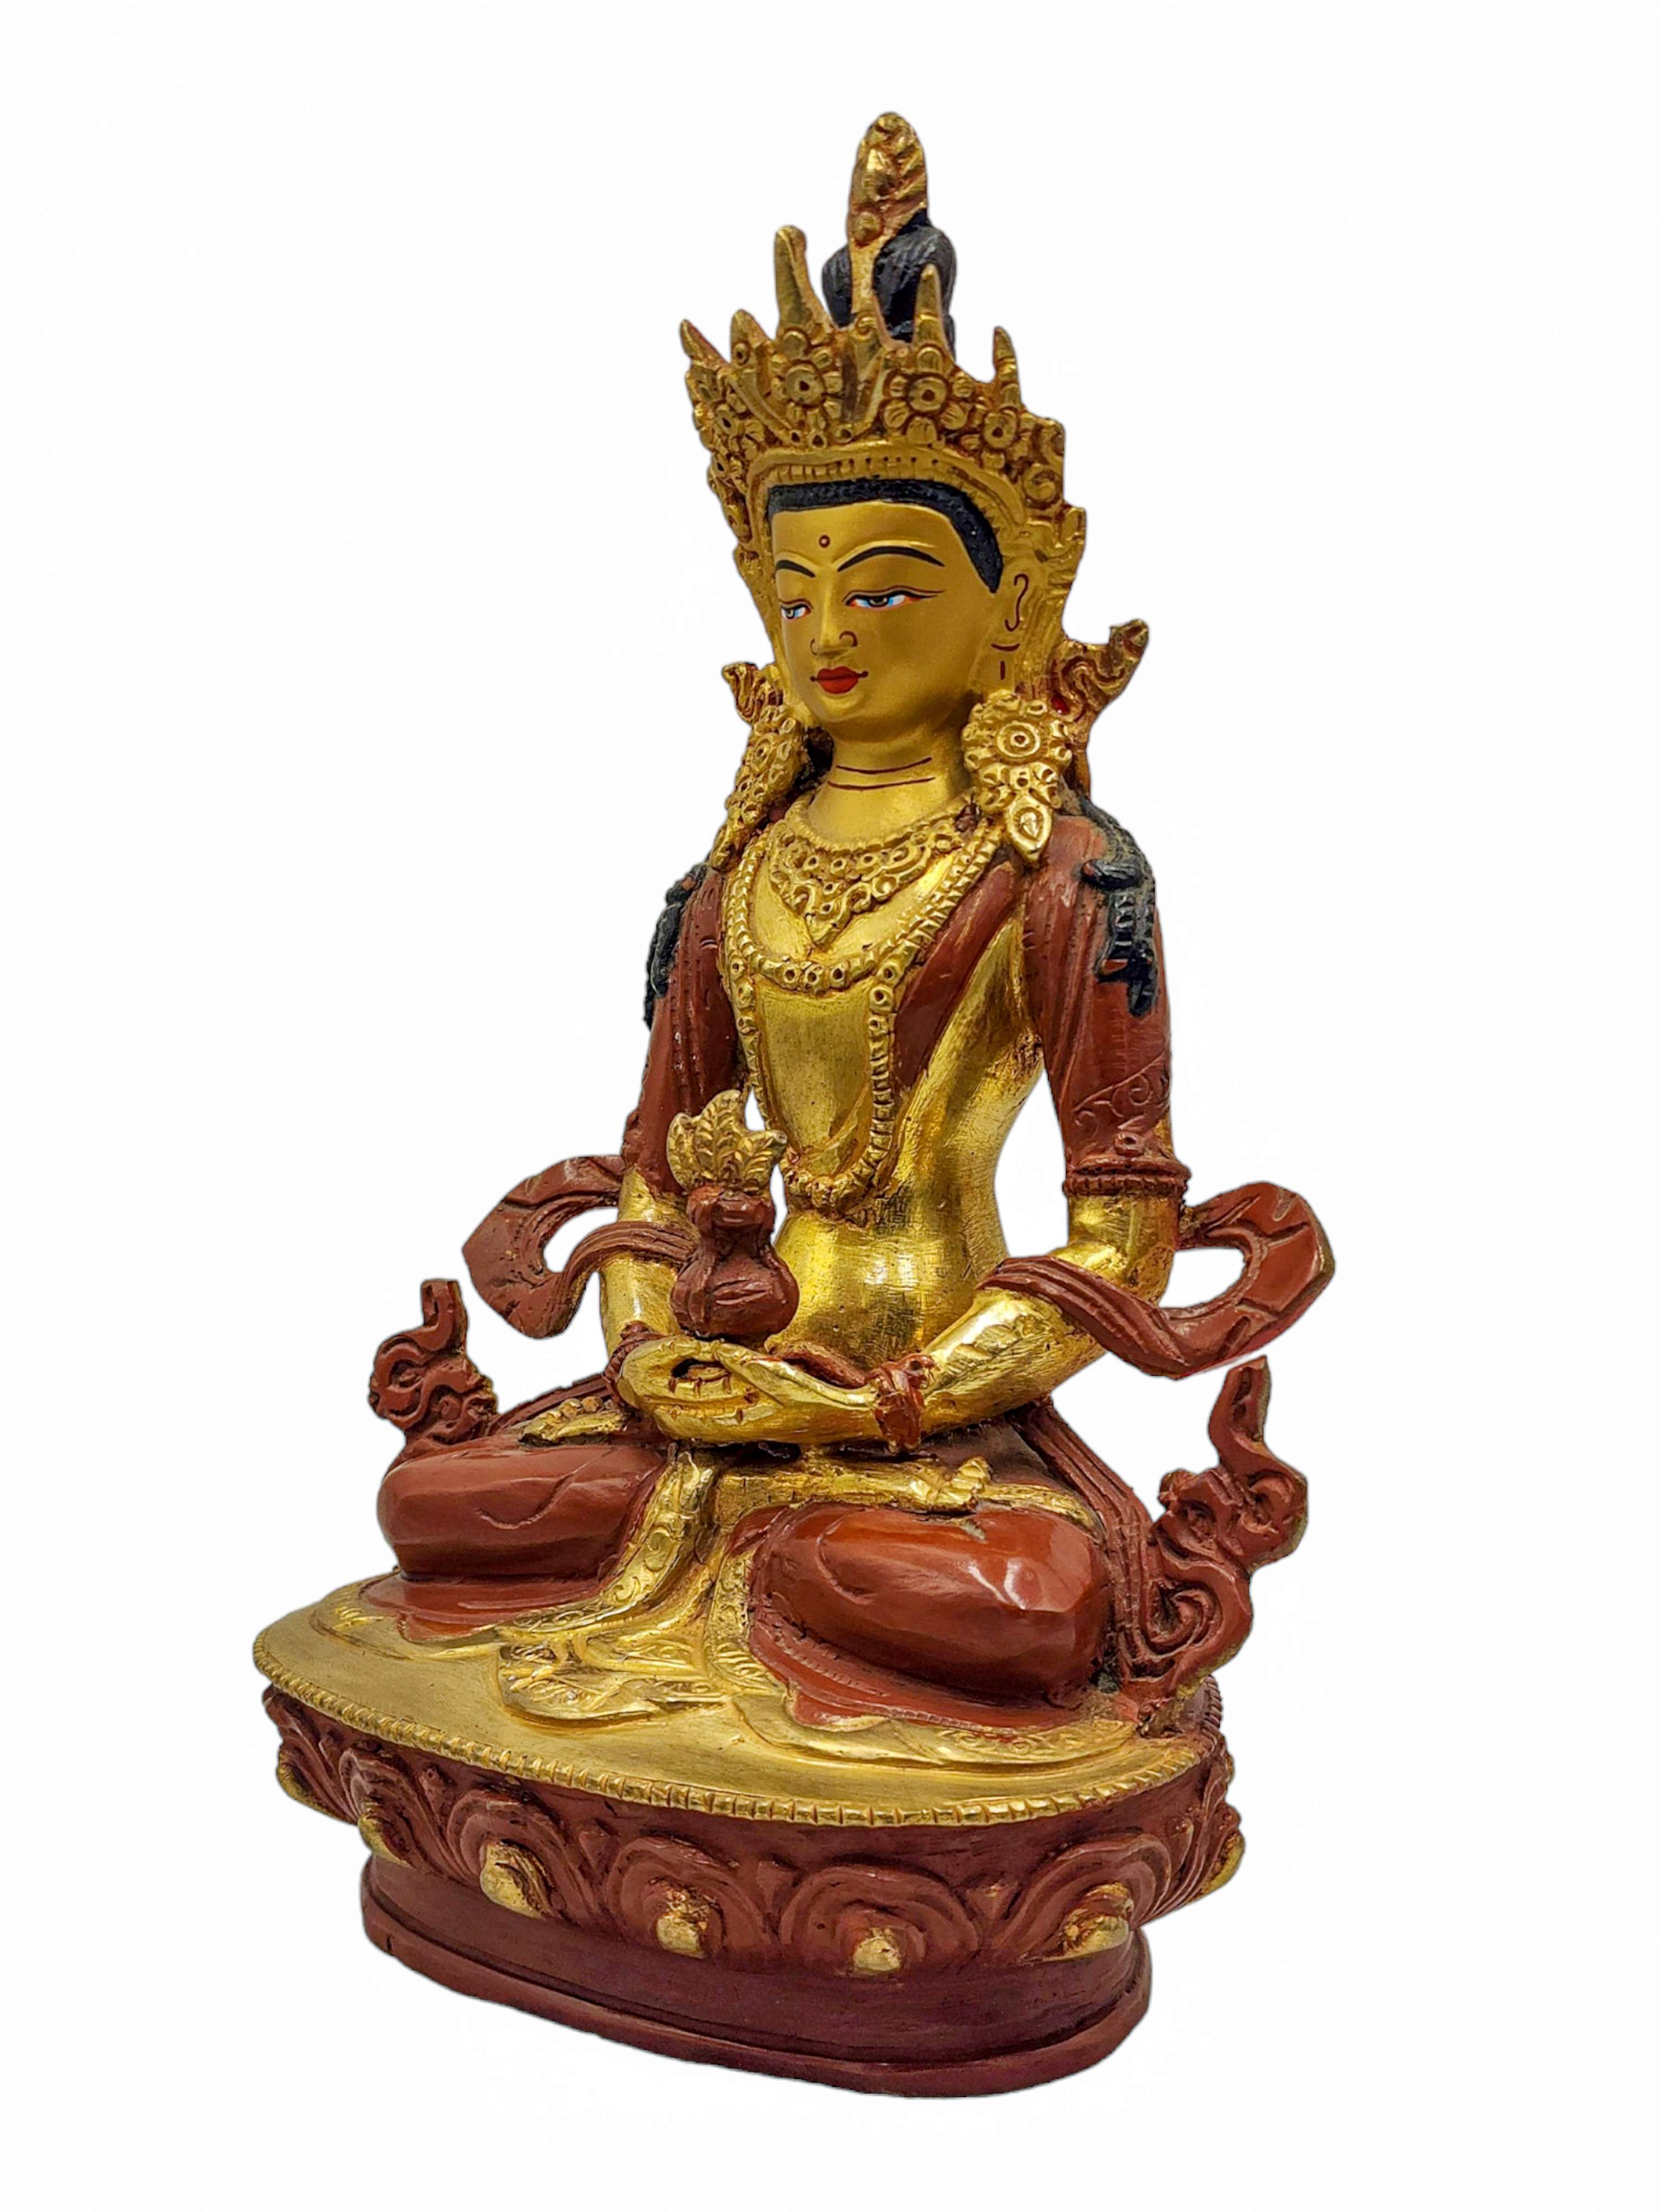 aparimita, Buddhist Handmade Statue, partly Gold Plated, Wtih face Painted